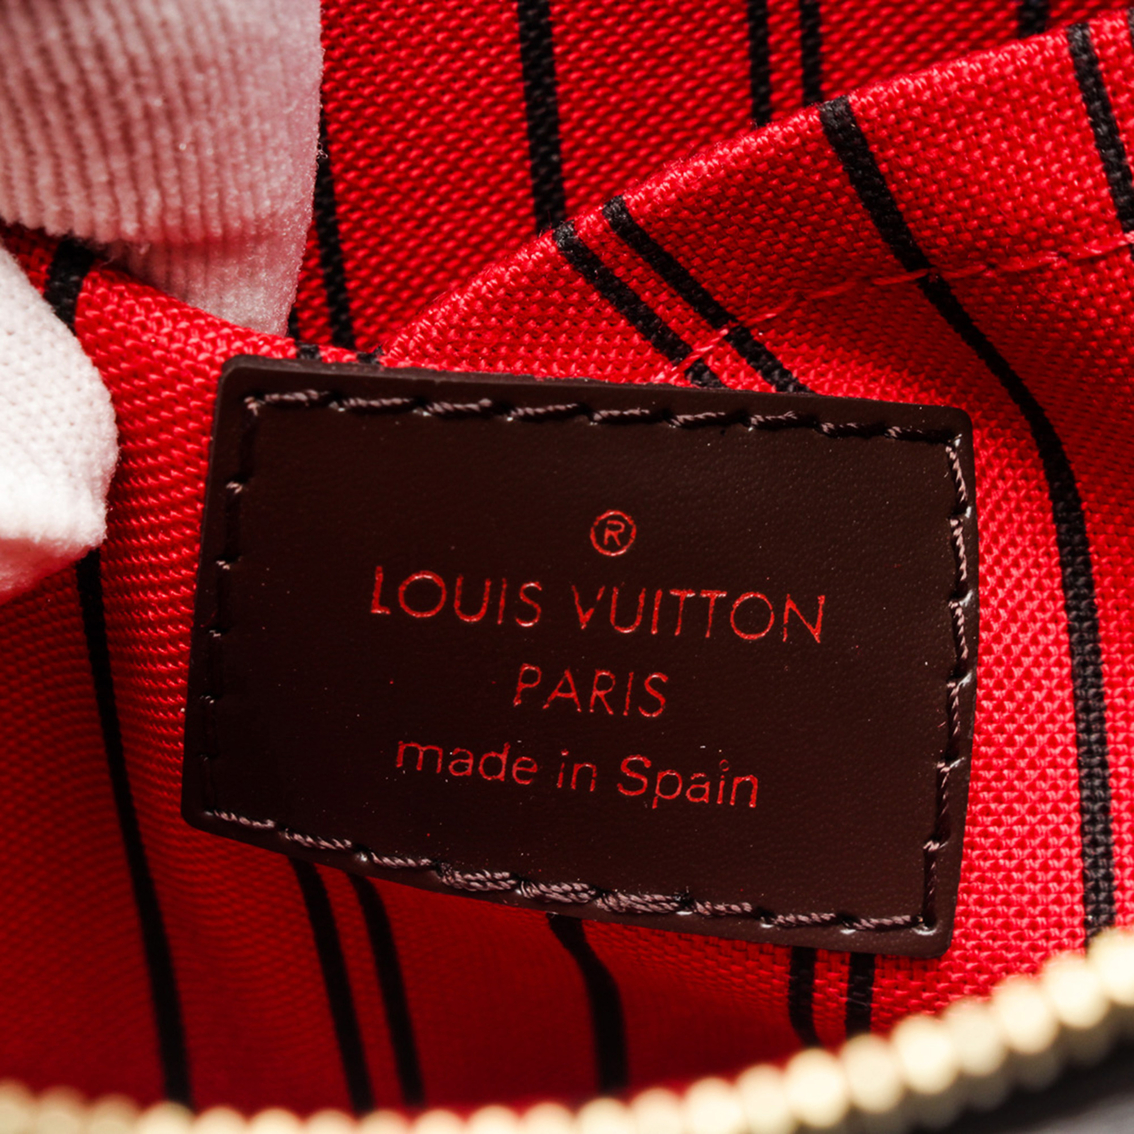 Louis Vuitton Nerverfull Pouch (Pre-Owned) - Image 6 of 8